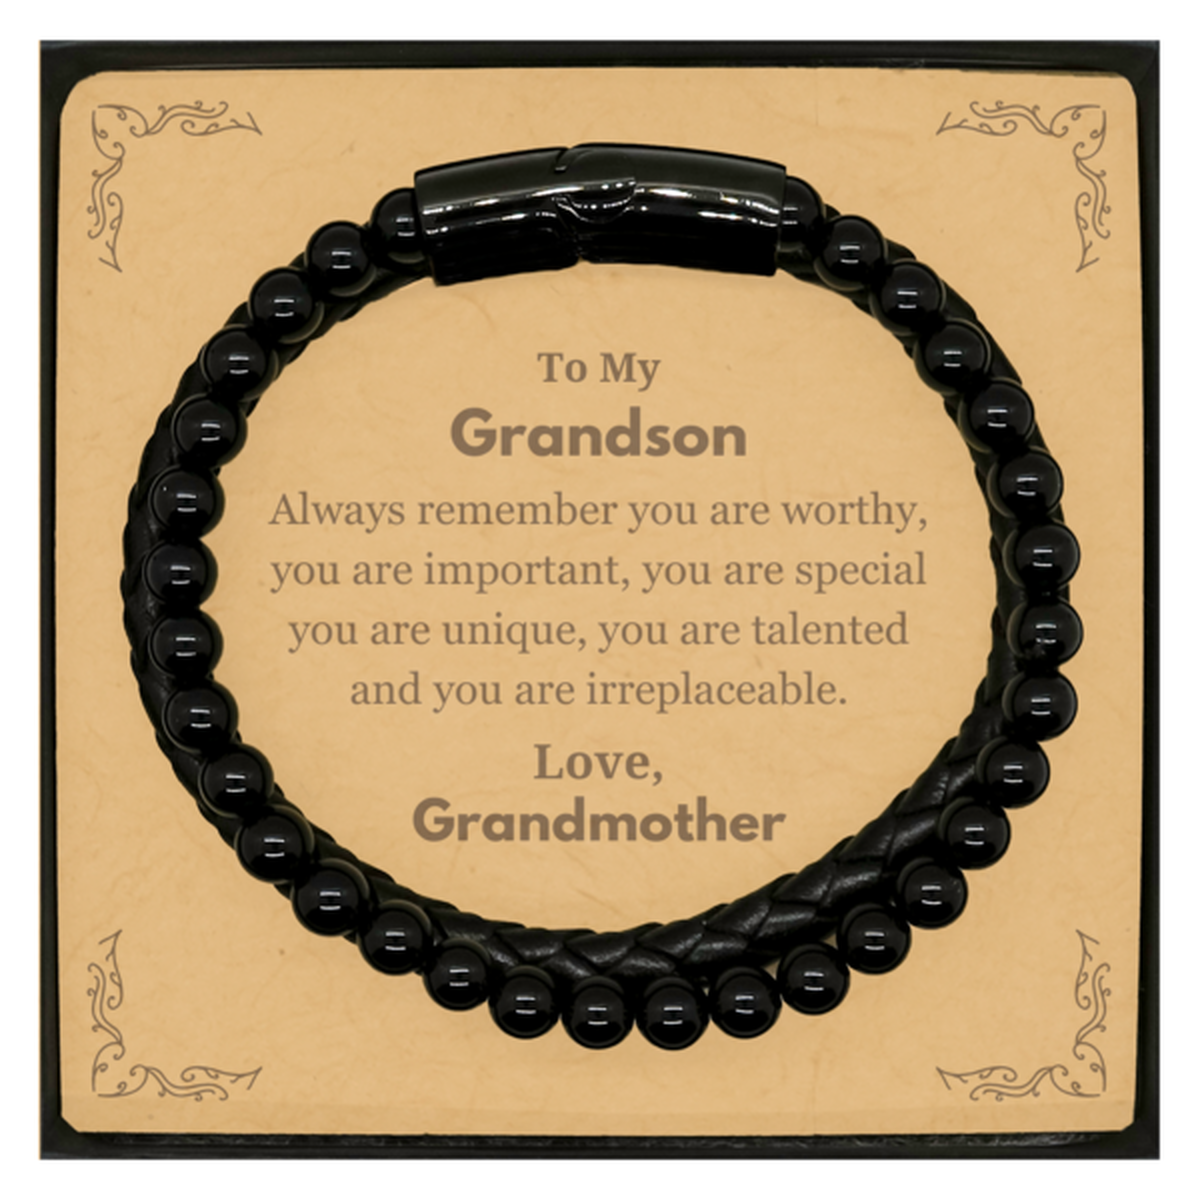 Grandson Birthday Gifts from Grandmother, Inspirational Stone Leather Bracelets for Grandson Christmas Graduation Gifts for Grandson Always remember you are worthy, you are important. Love, Grandmother